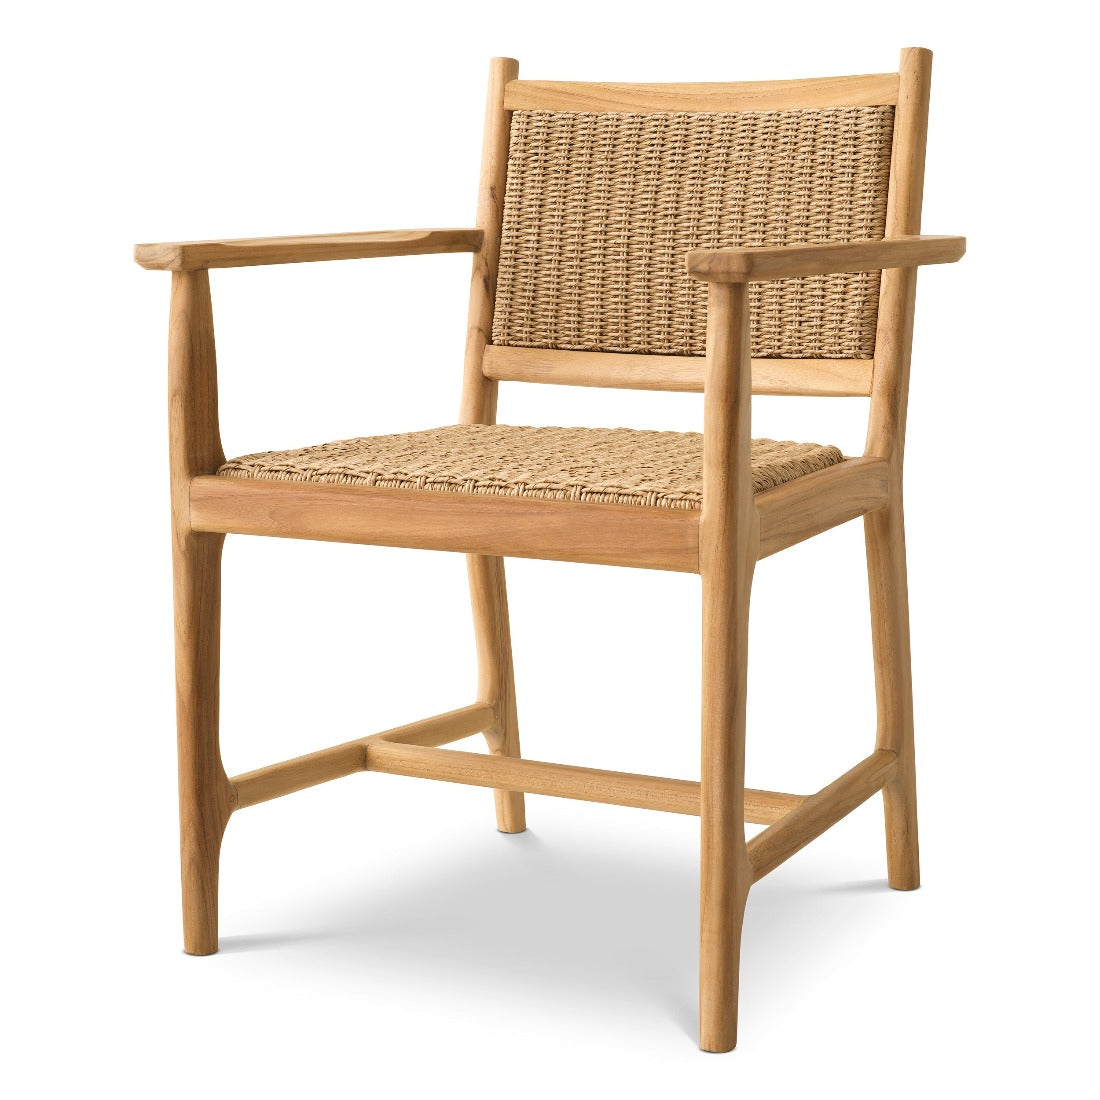 Outdoor dining chair Eichholtz Pivetti with arm Naturel